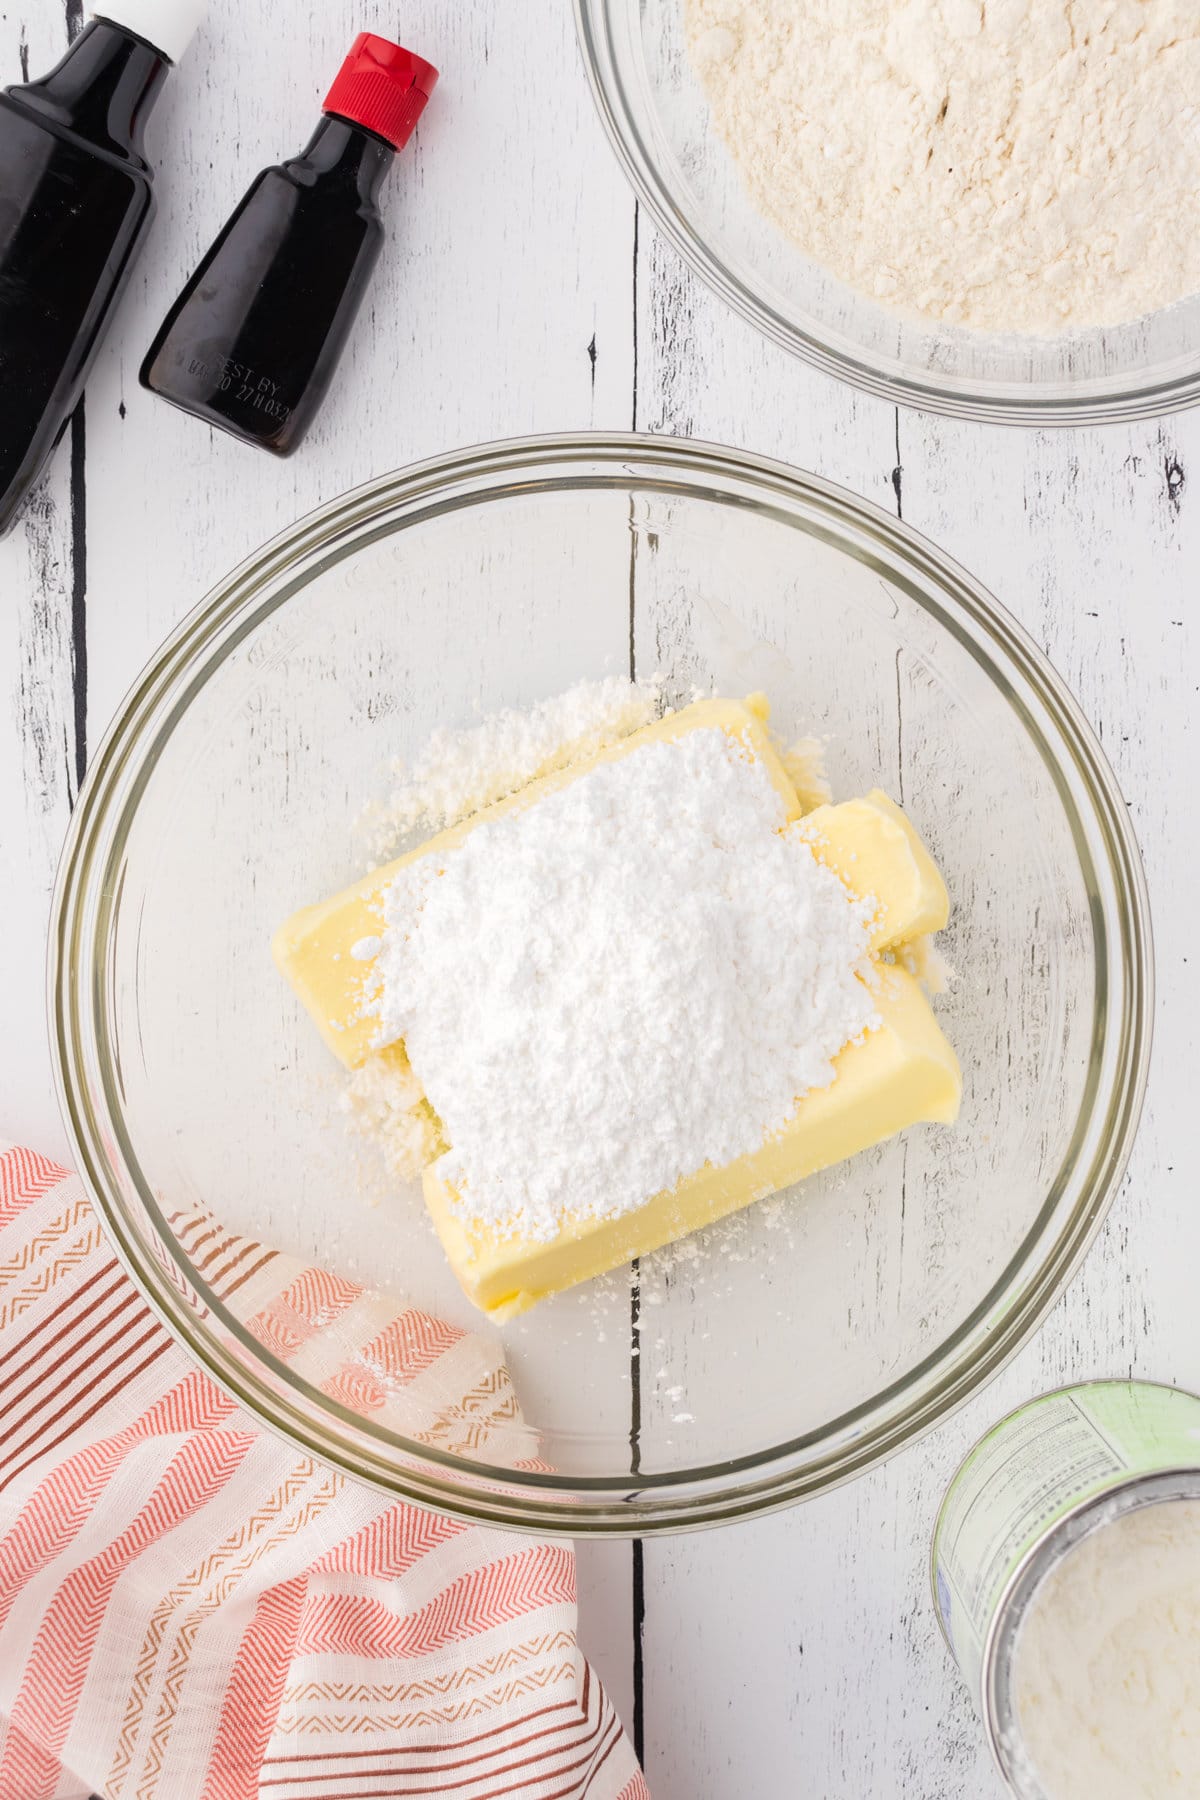 Butter and powdered sugar in a mixing bowl.